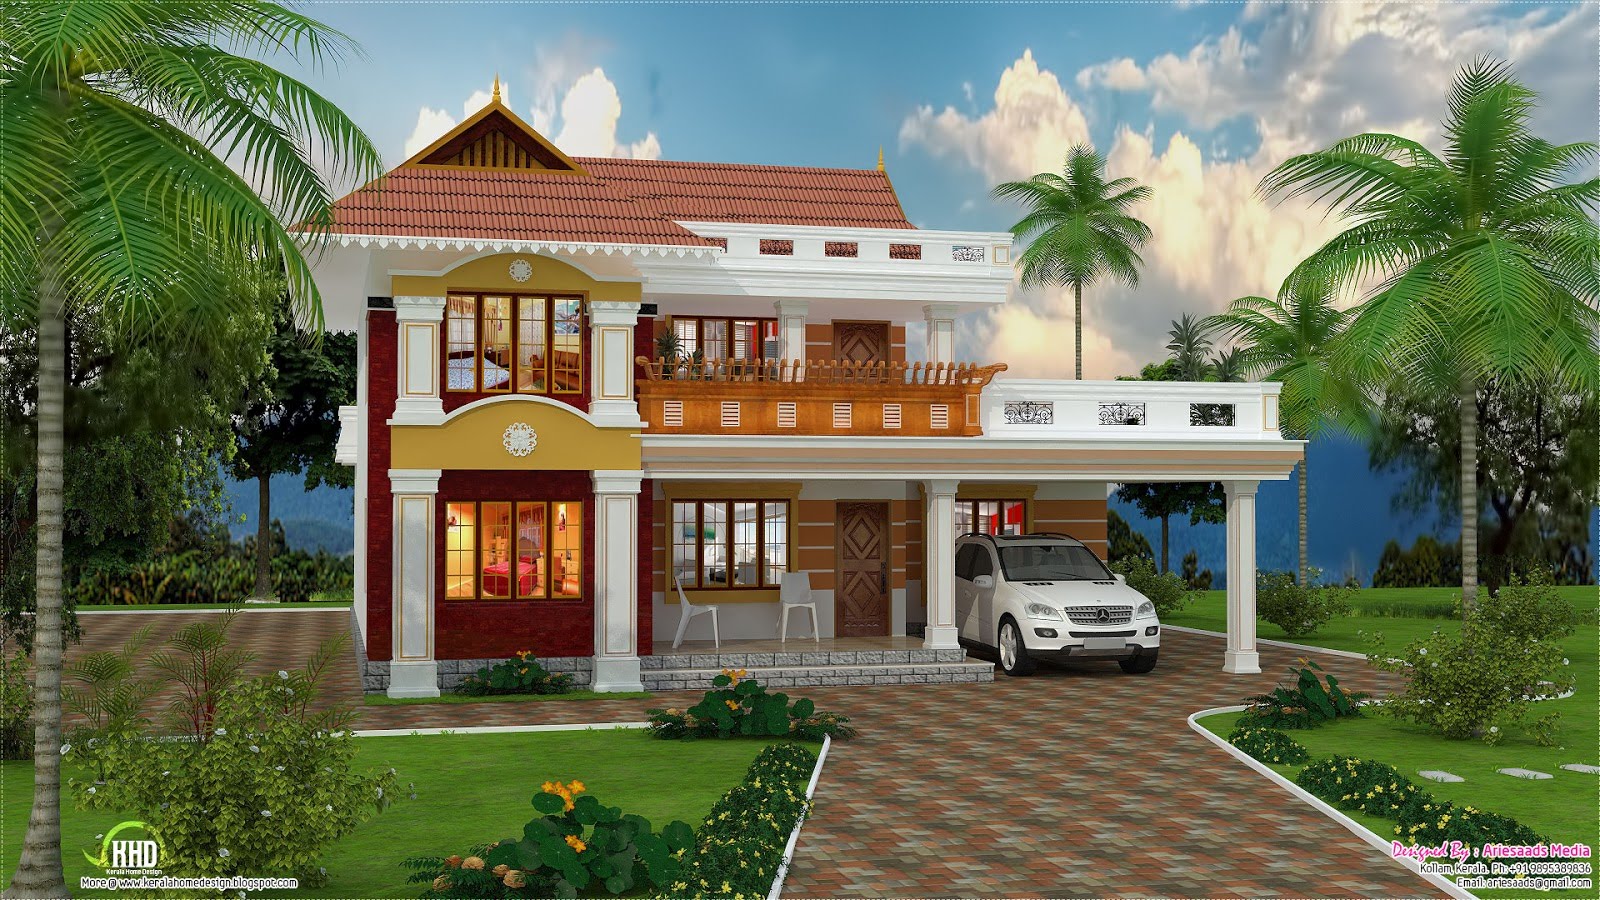 Amazing Architectural Designs Of Modern Houses In India ...